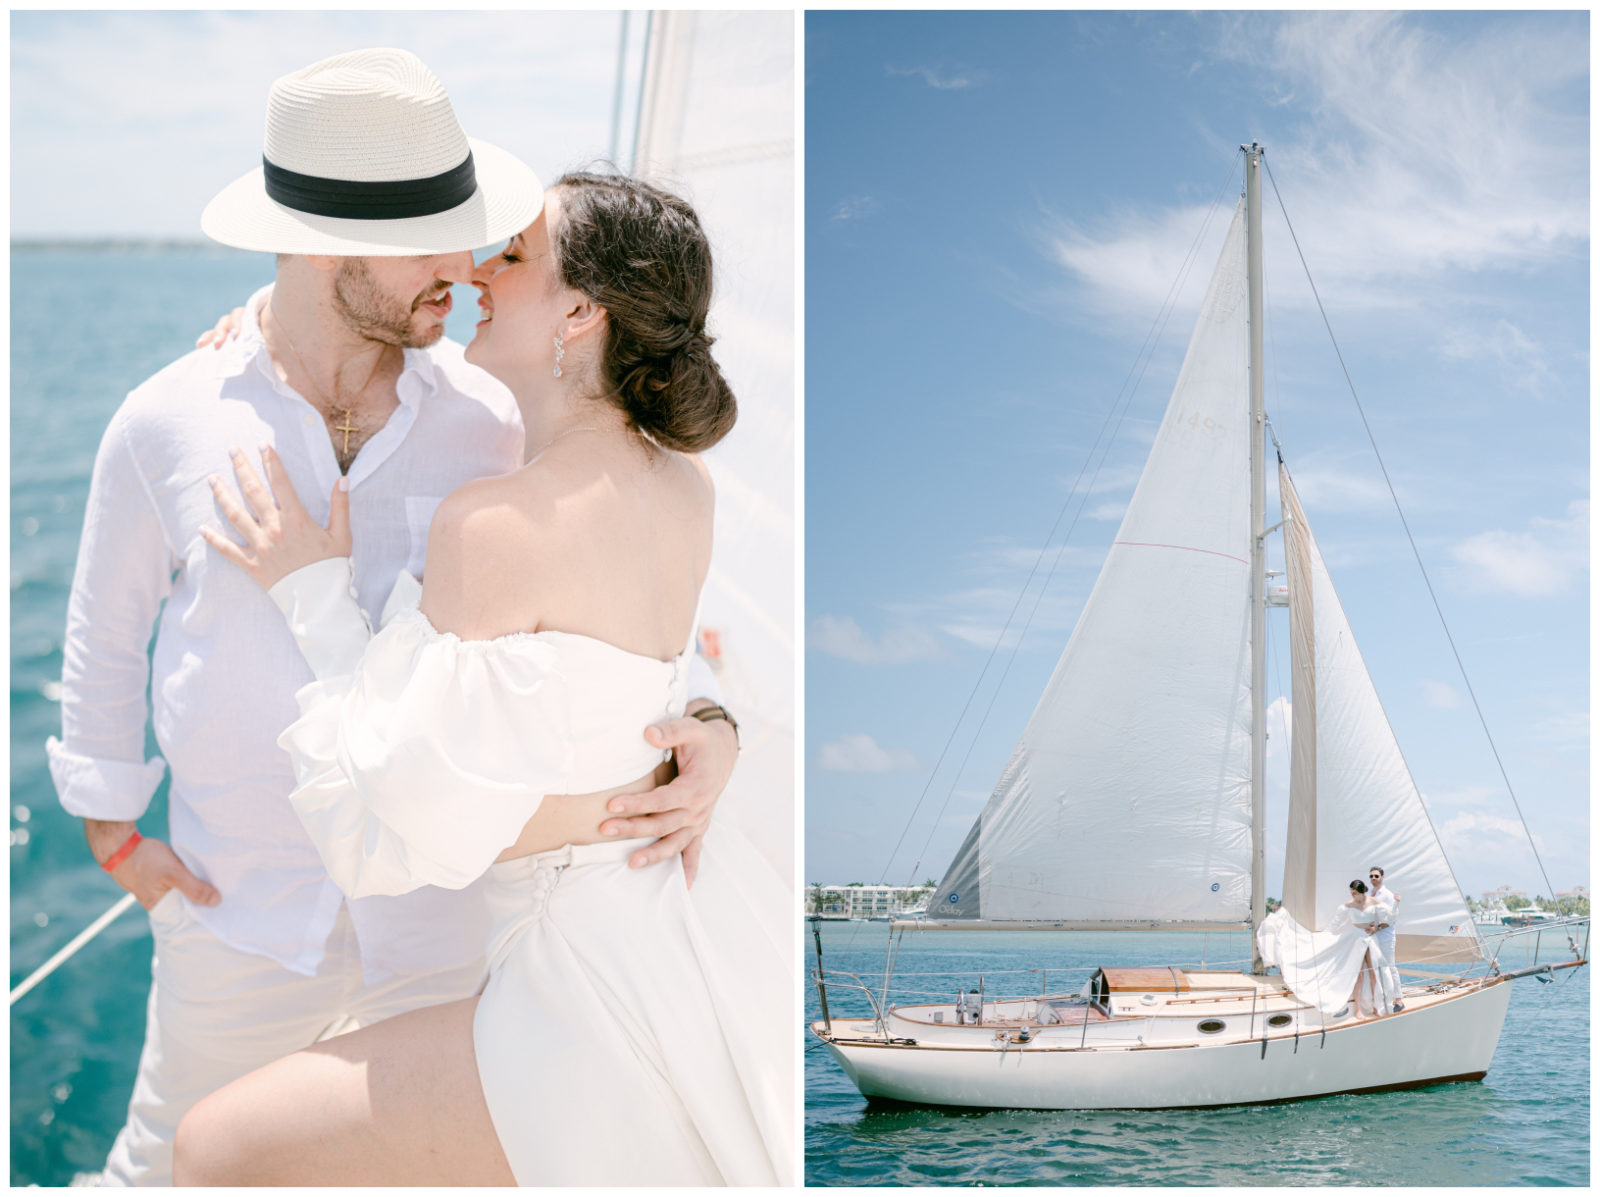 Southern wedding styled shoot on a sailboat in South Florida